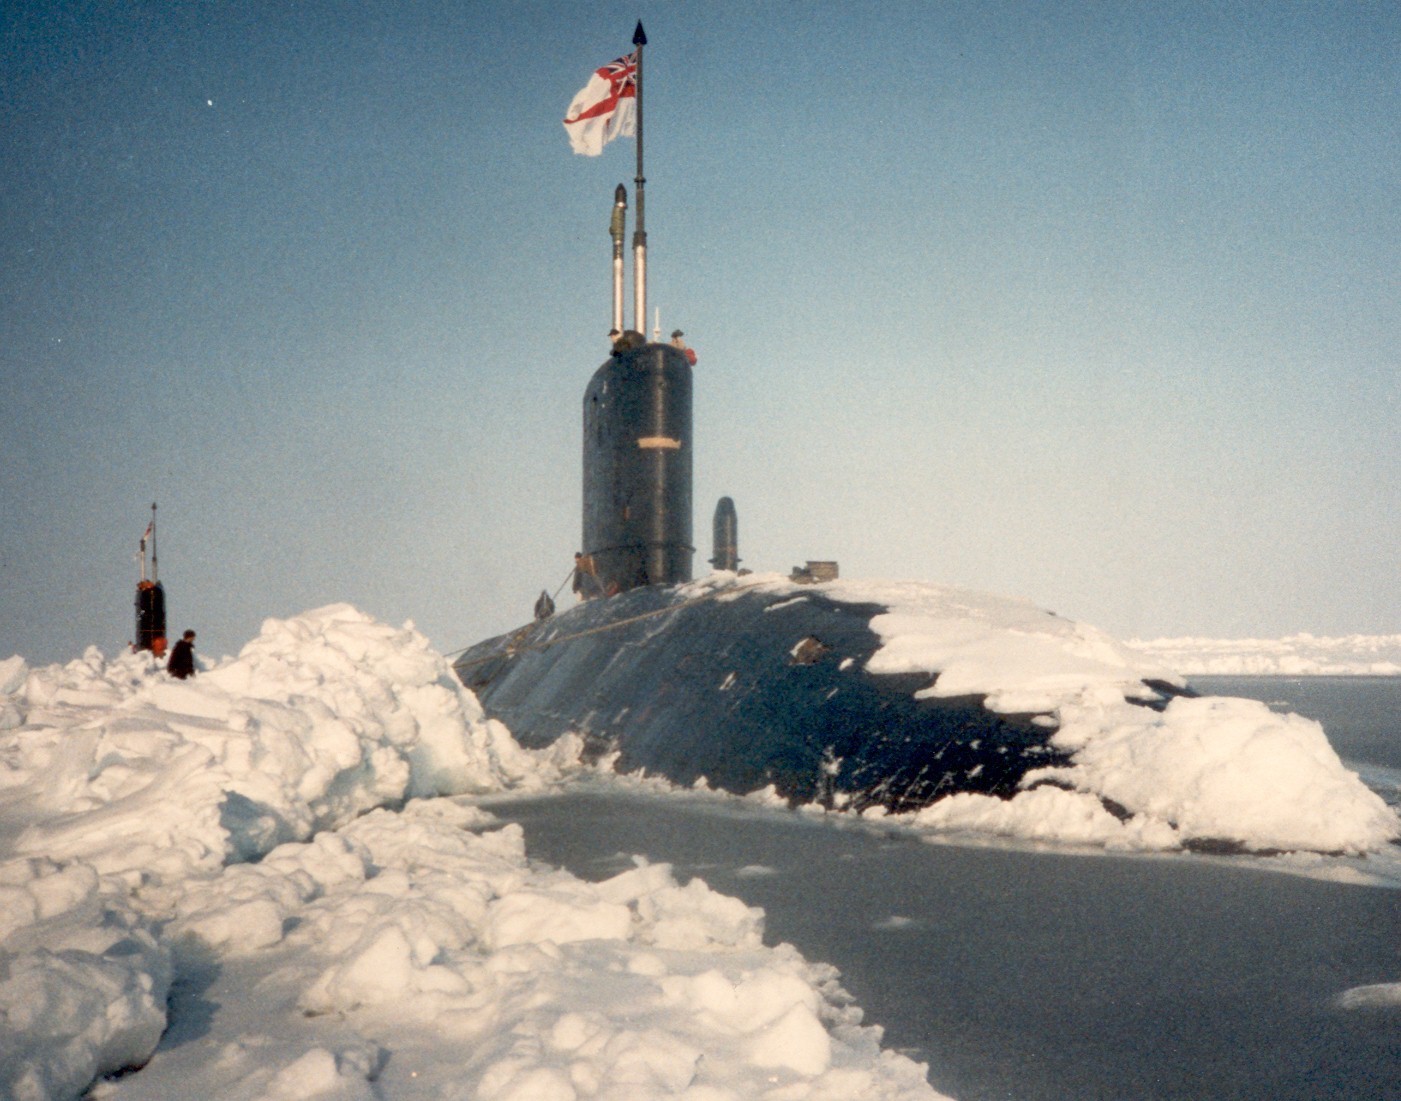 Two RN Submarines surface at the North Pole in 1988